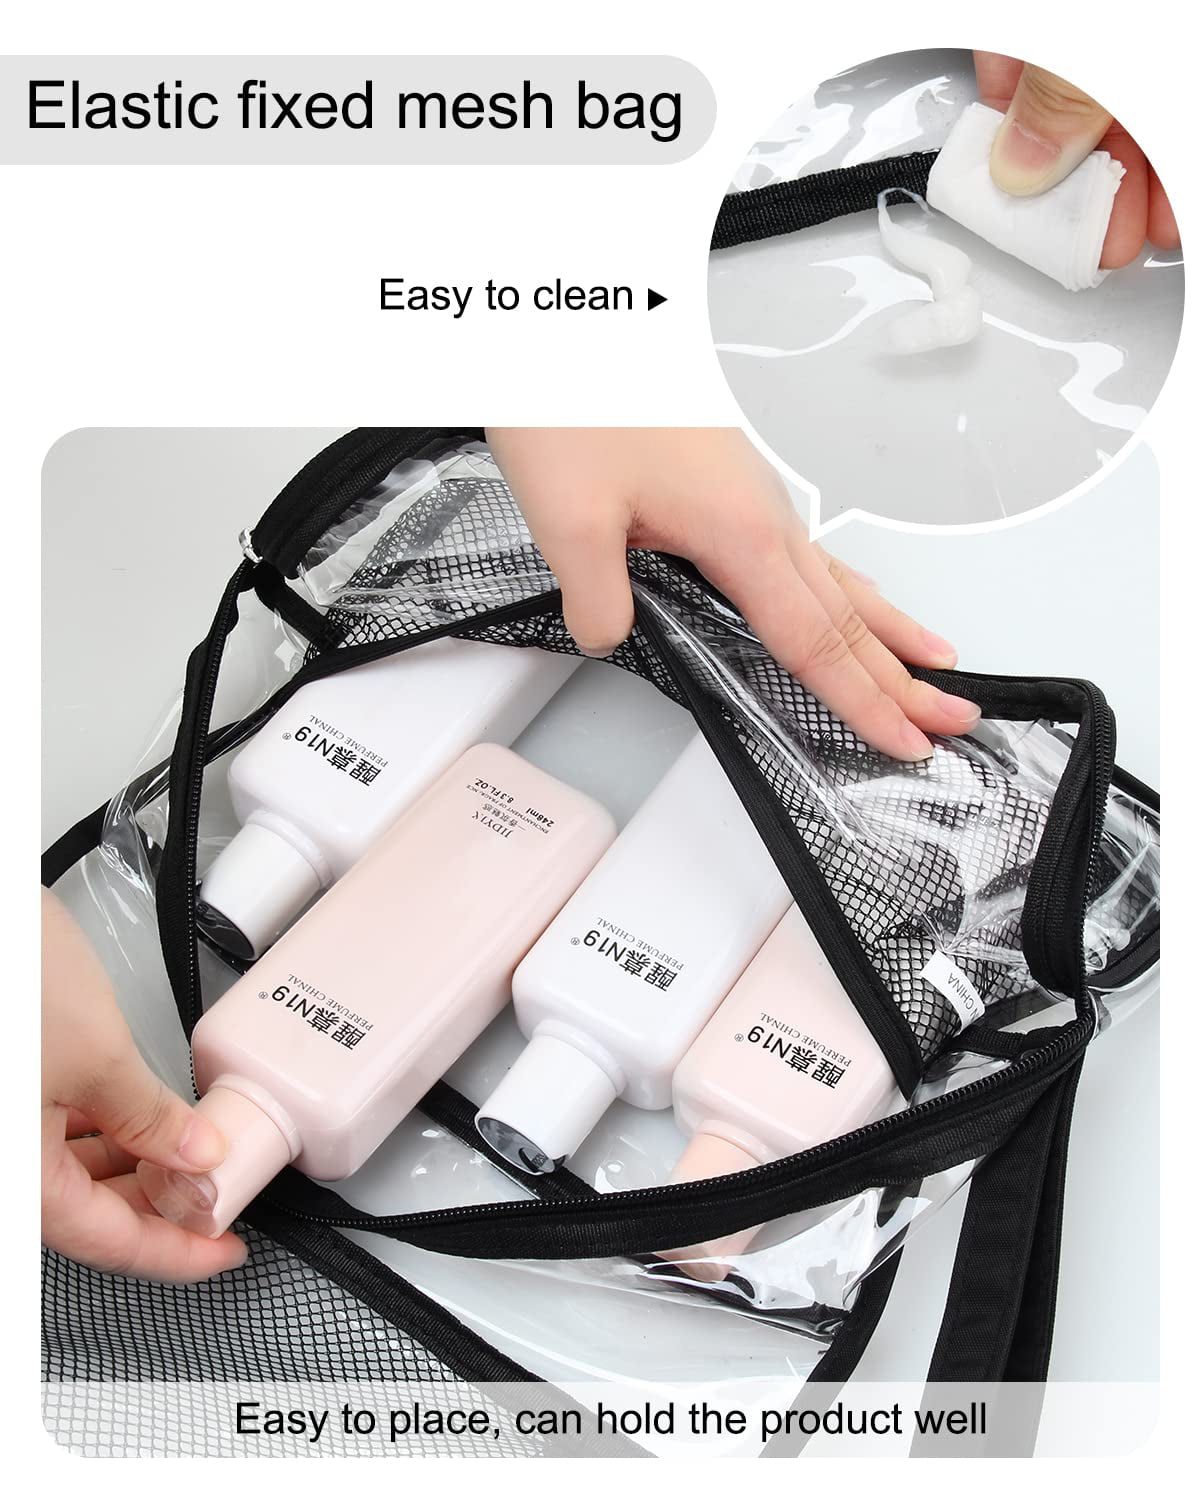 EzPacking Clear TSA Approved 3-1-1 Travel Toiletry Bag for Carry On/Quart Size Transparent Liquids Pouch for Airport Security & Carry On/Reusable See Through